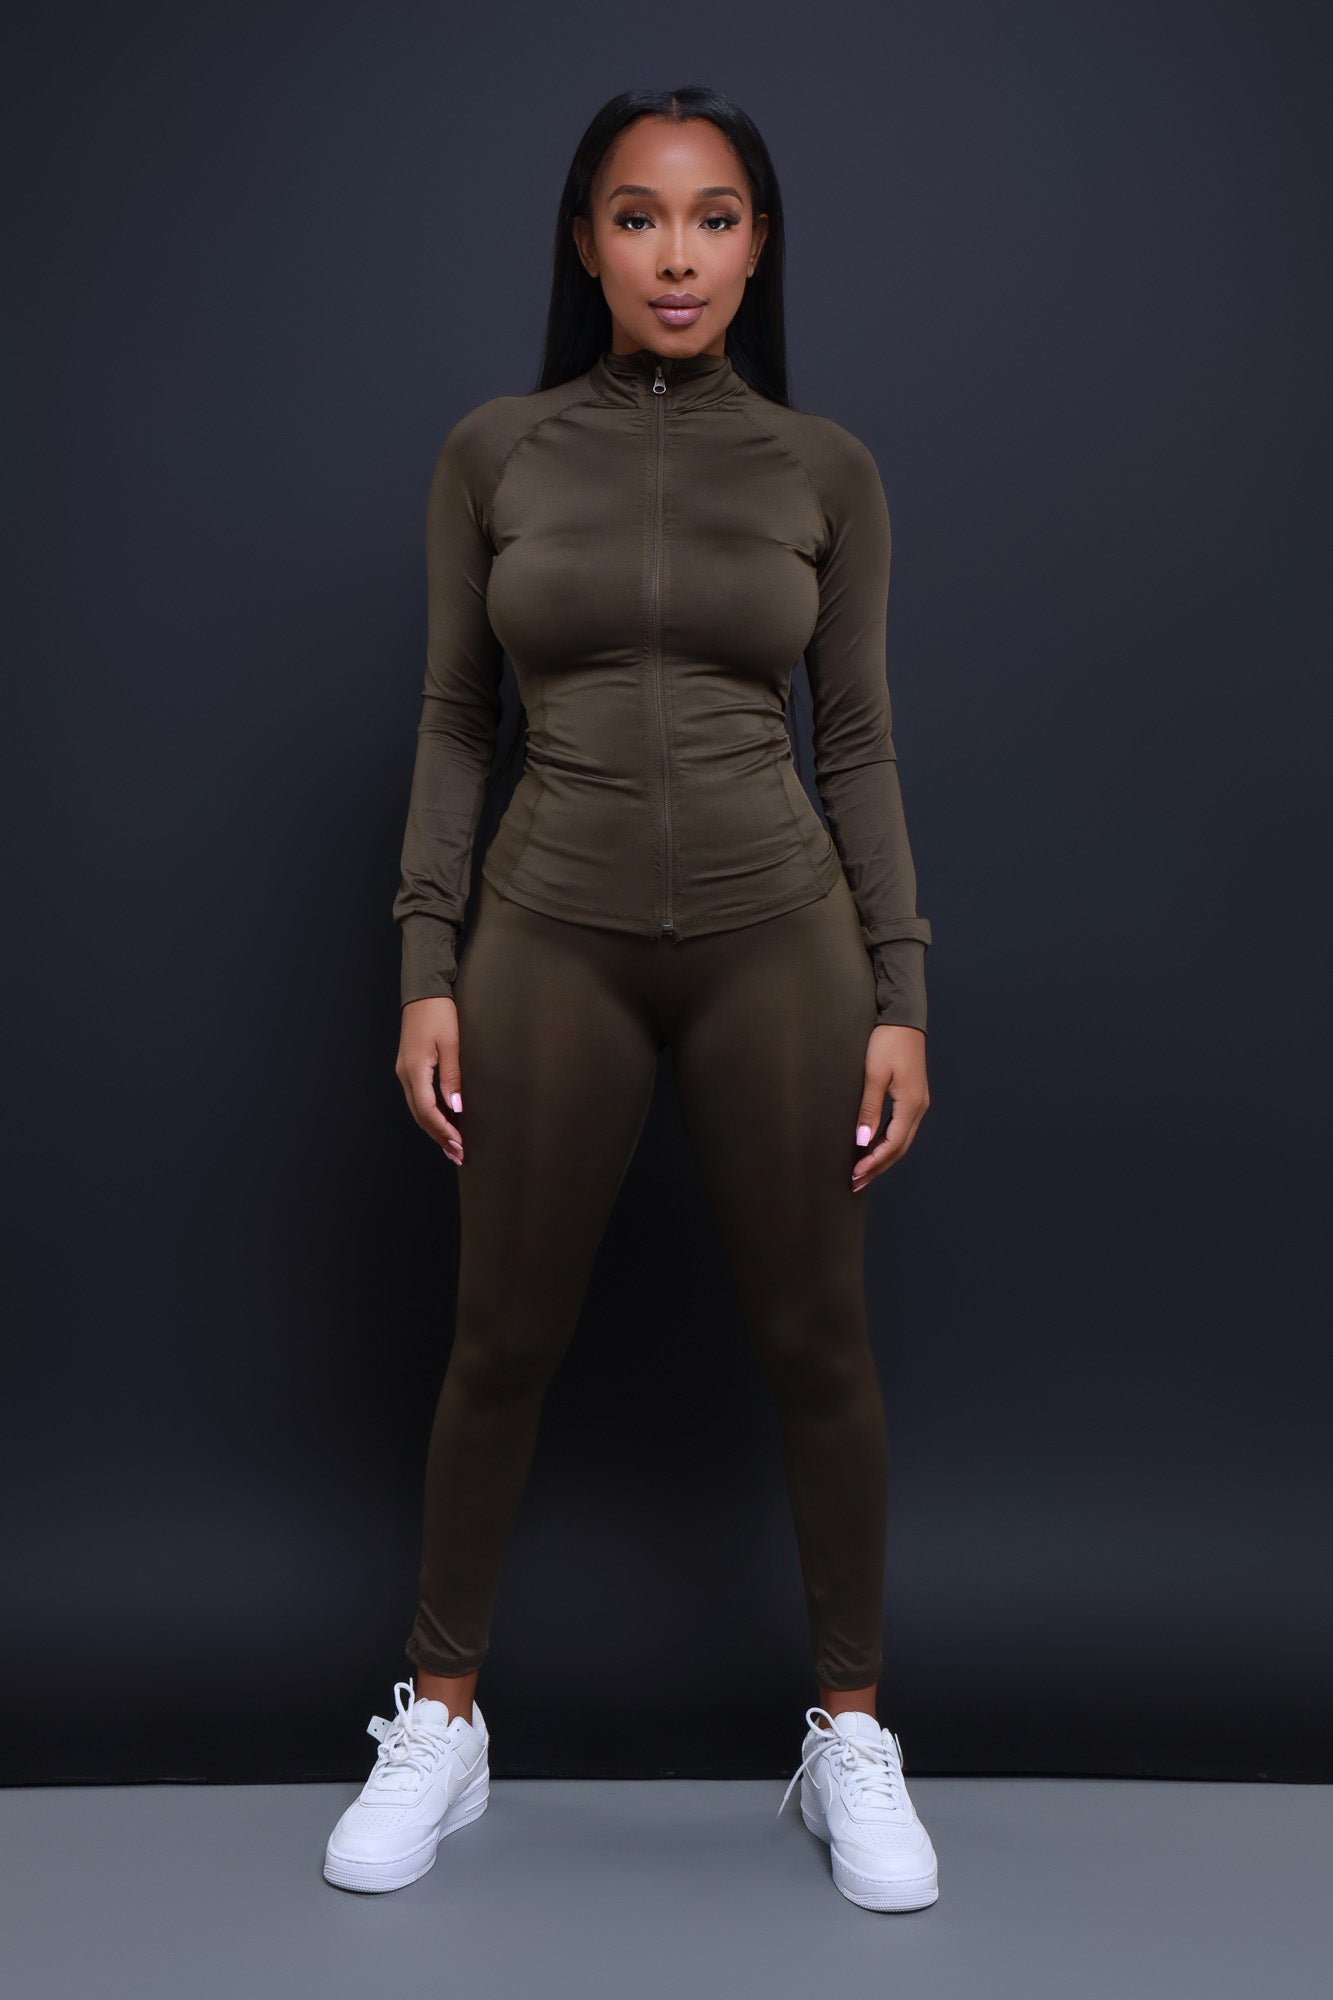 Easy Fit Athletic Set - Olive - Swank A Posh